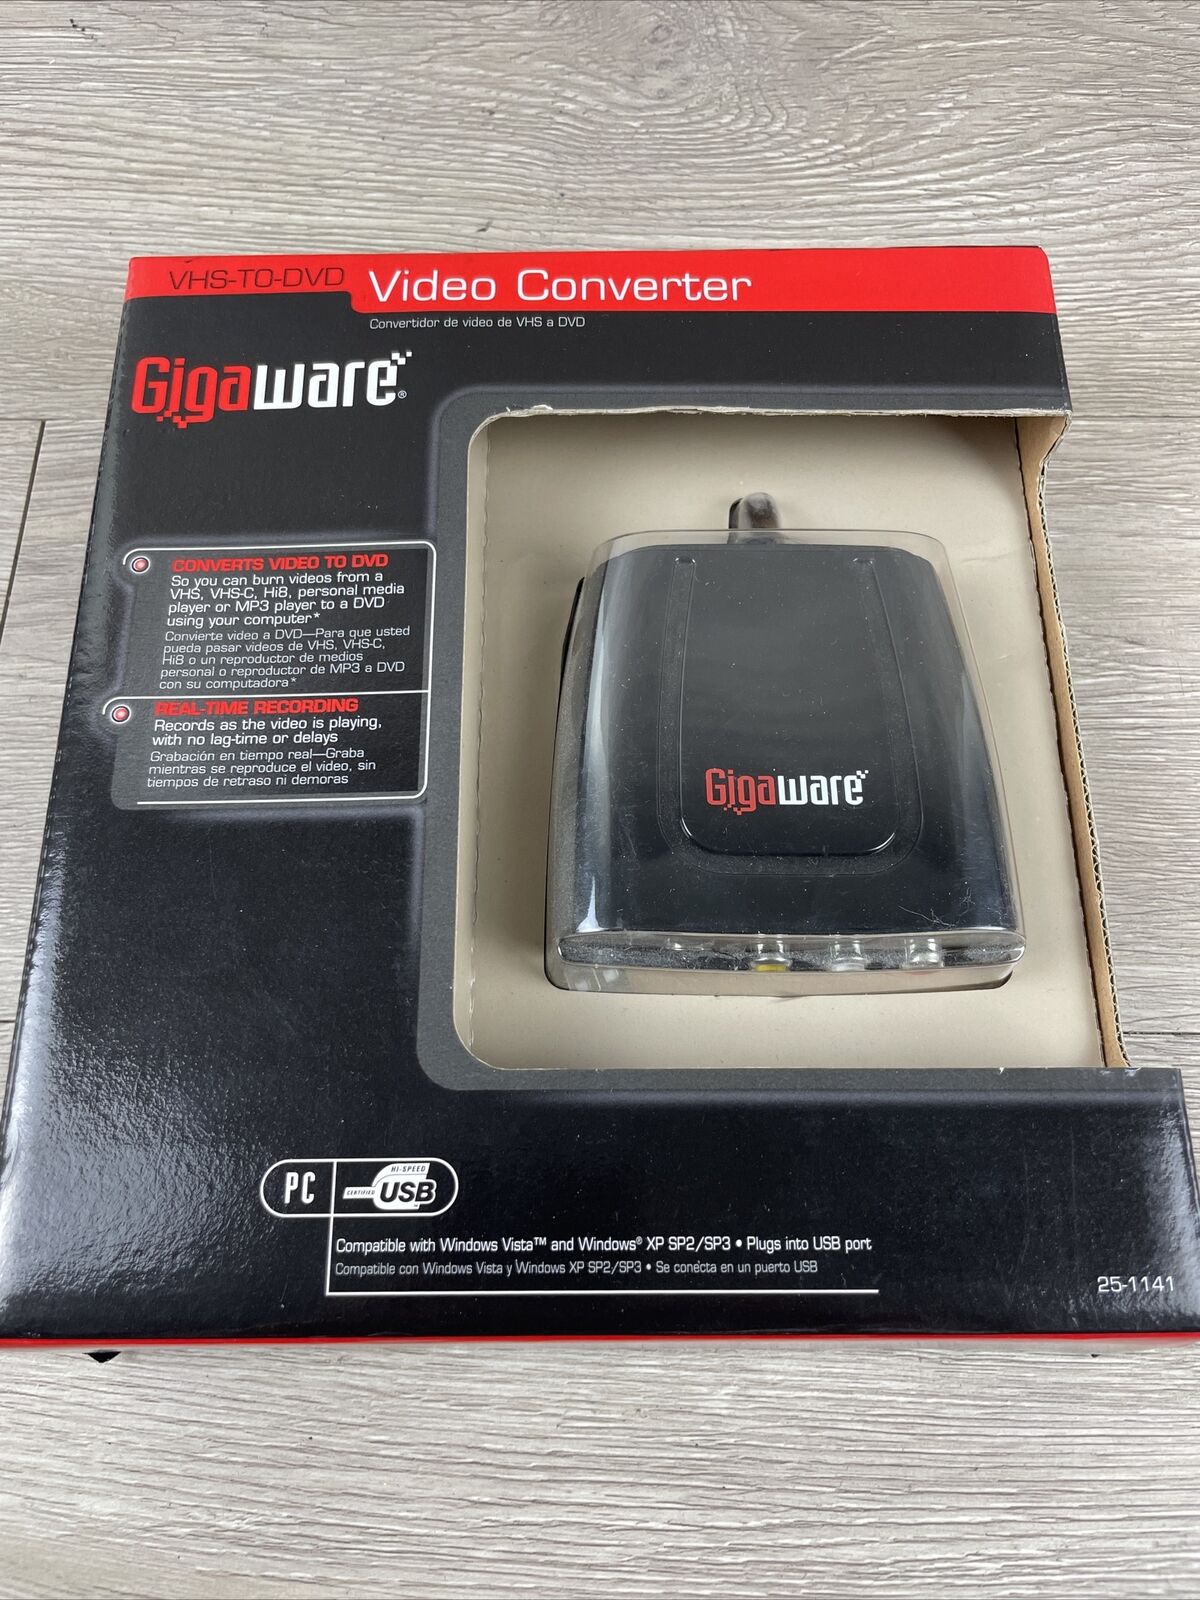 Gigaware 2501141 VHS-TO-DVD Or MP4 Video Converter New Sealed S Video Composite